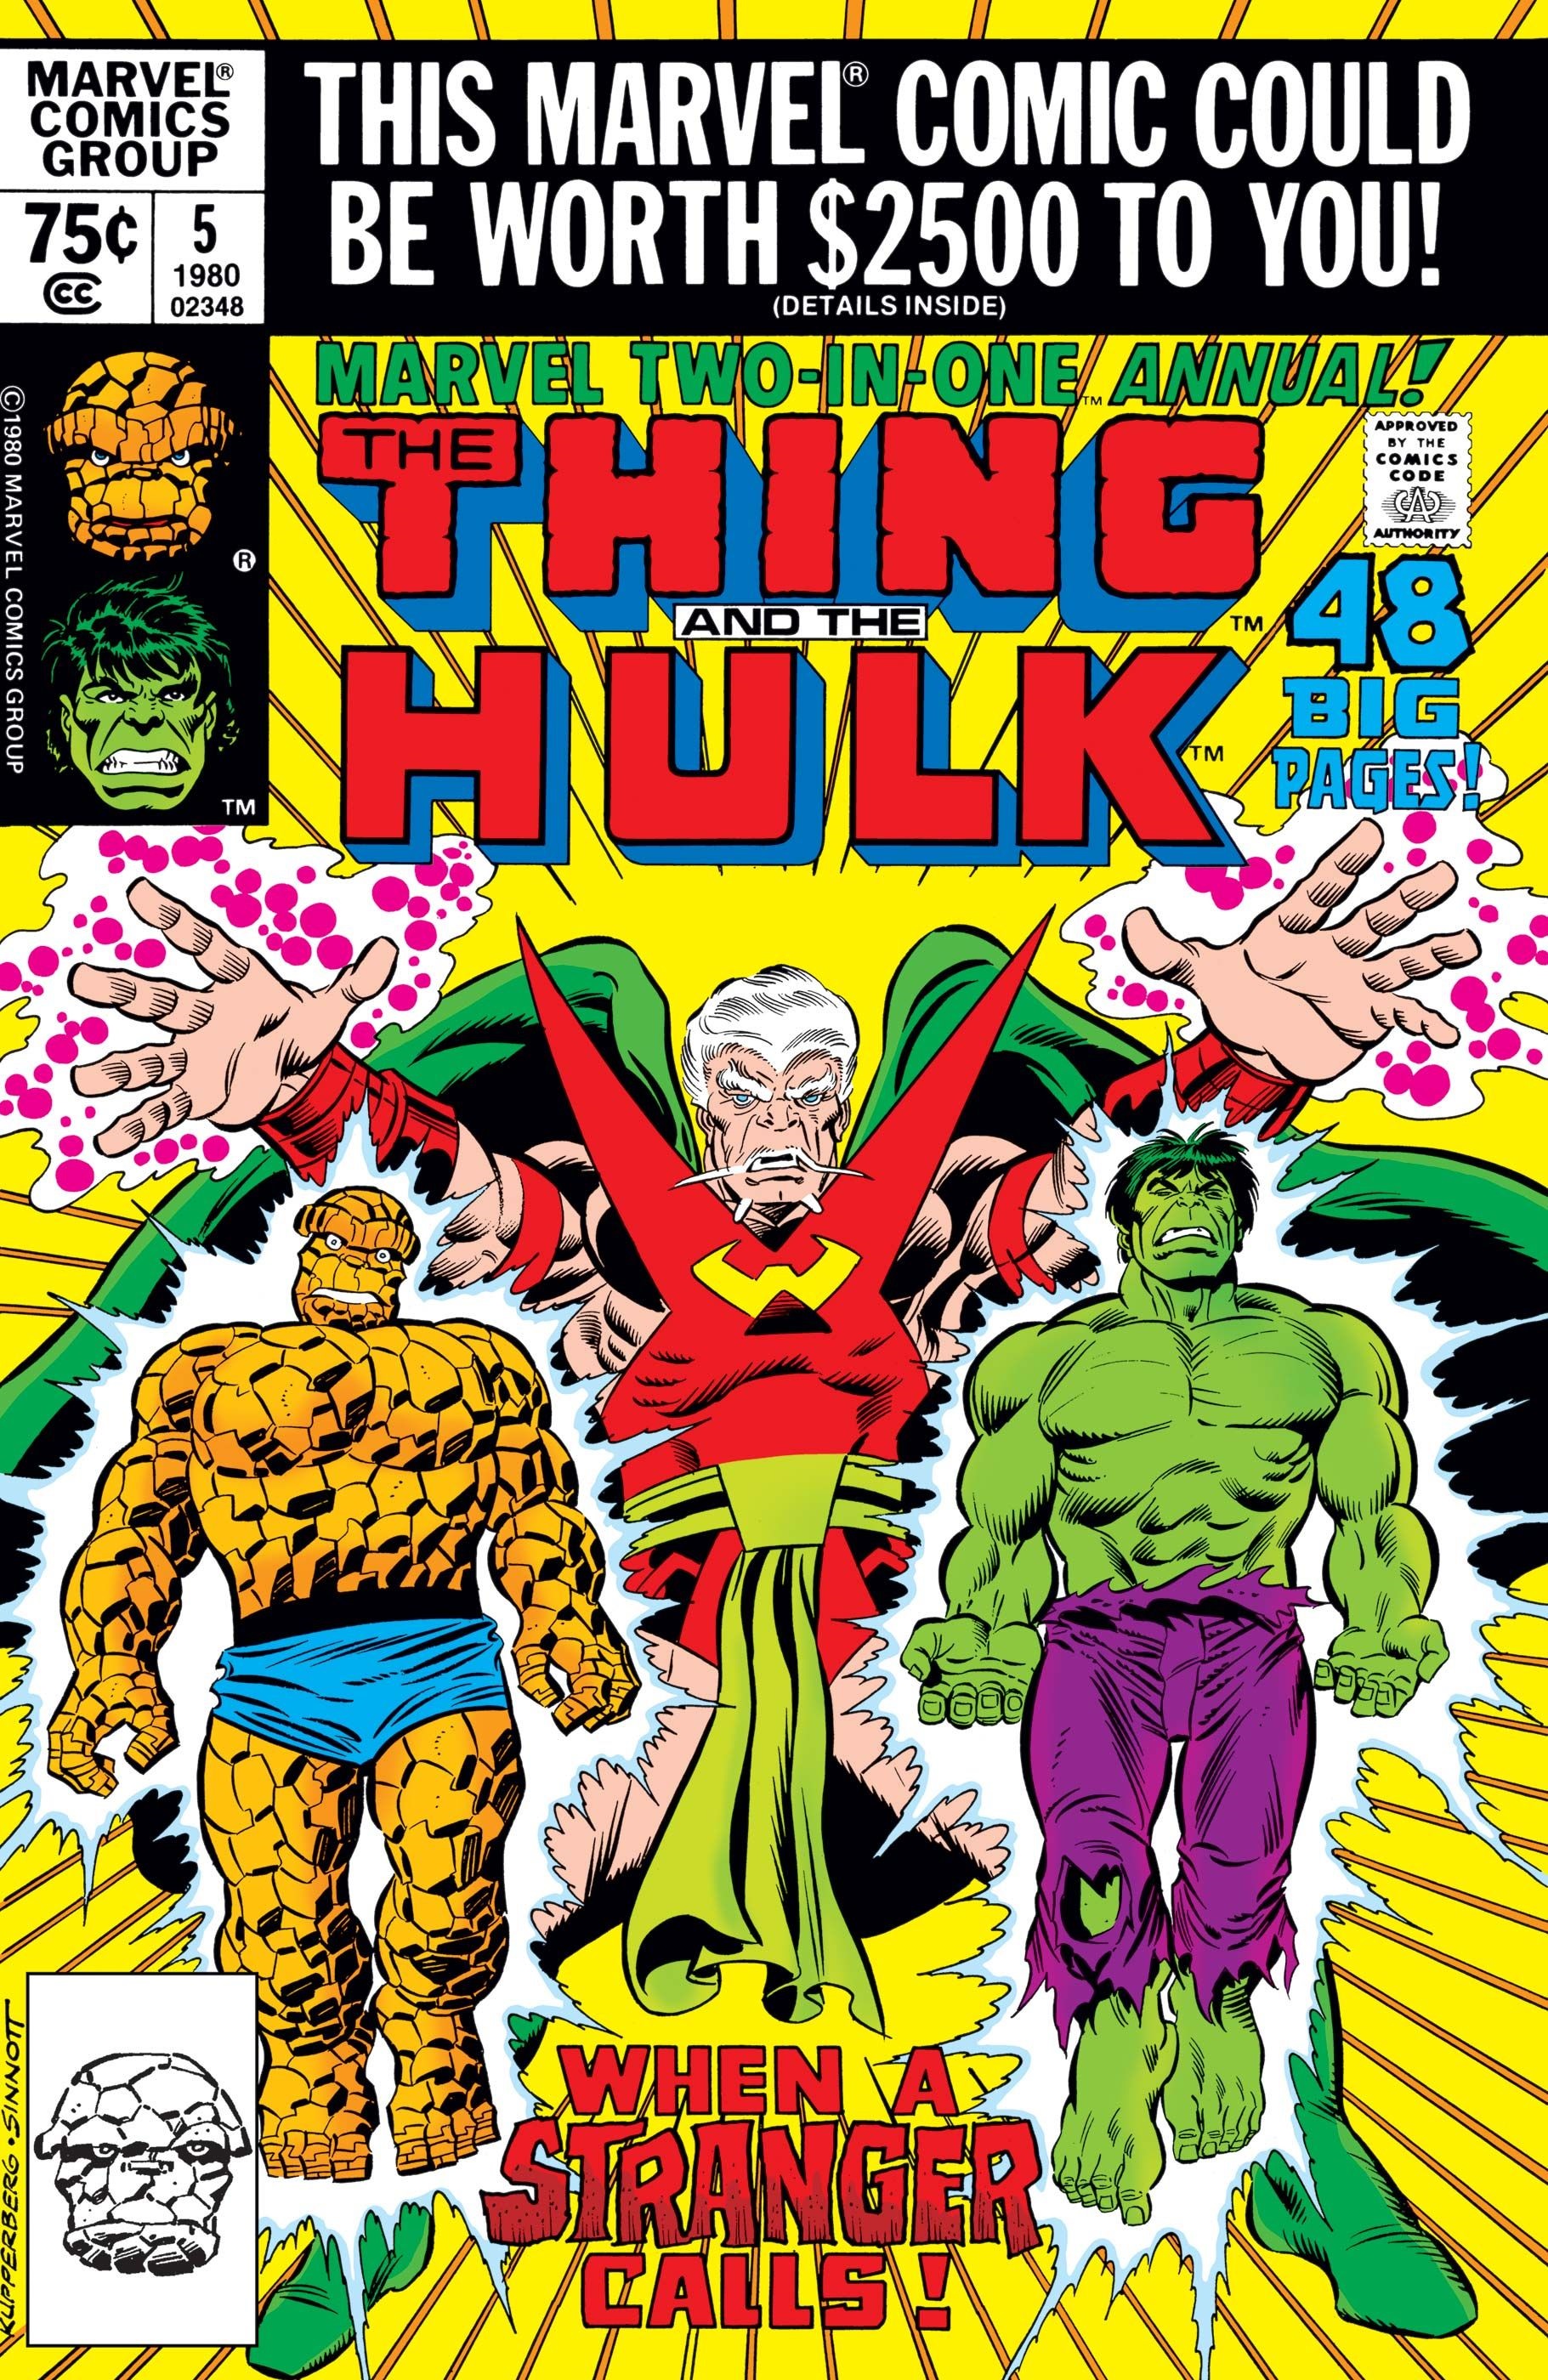 Marvel Two-in-One Annual (1976) #5